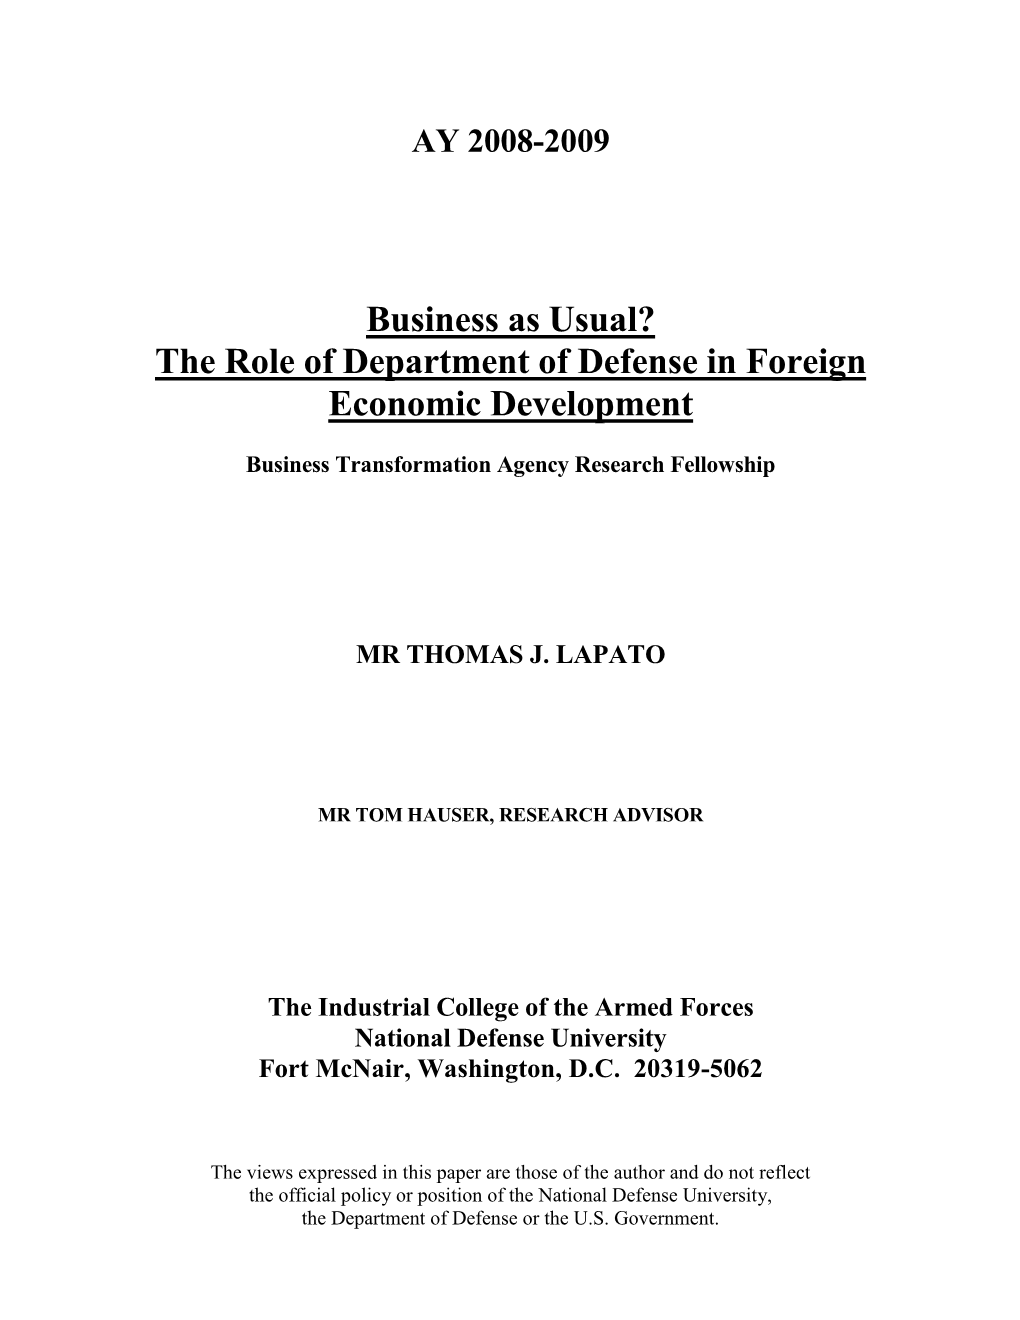 The Role of Department of Defense in Foreign Economic Development